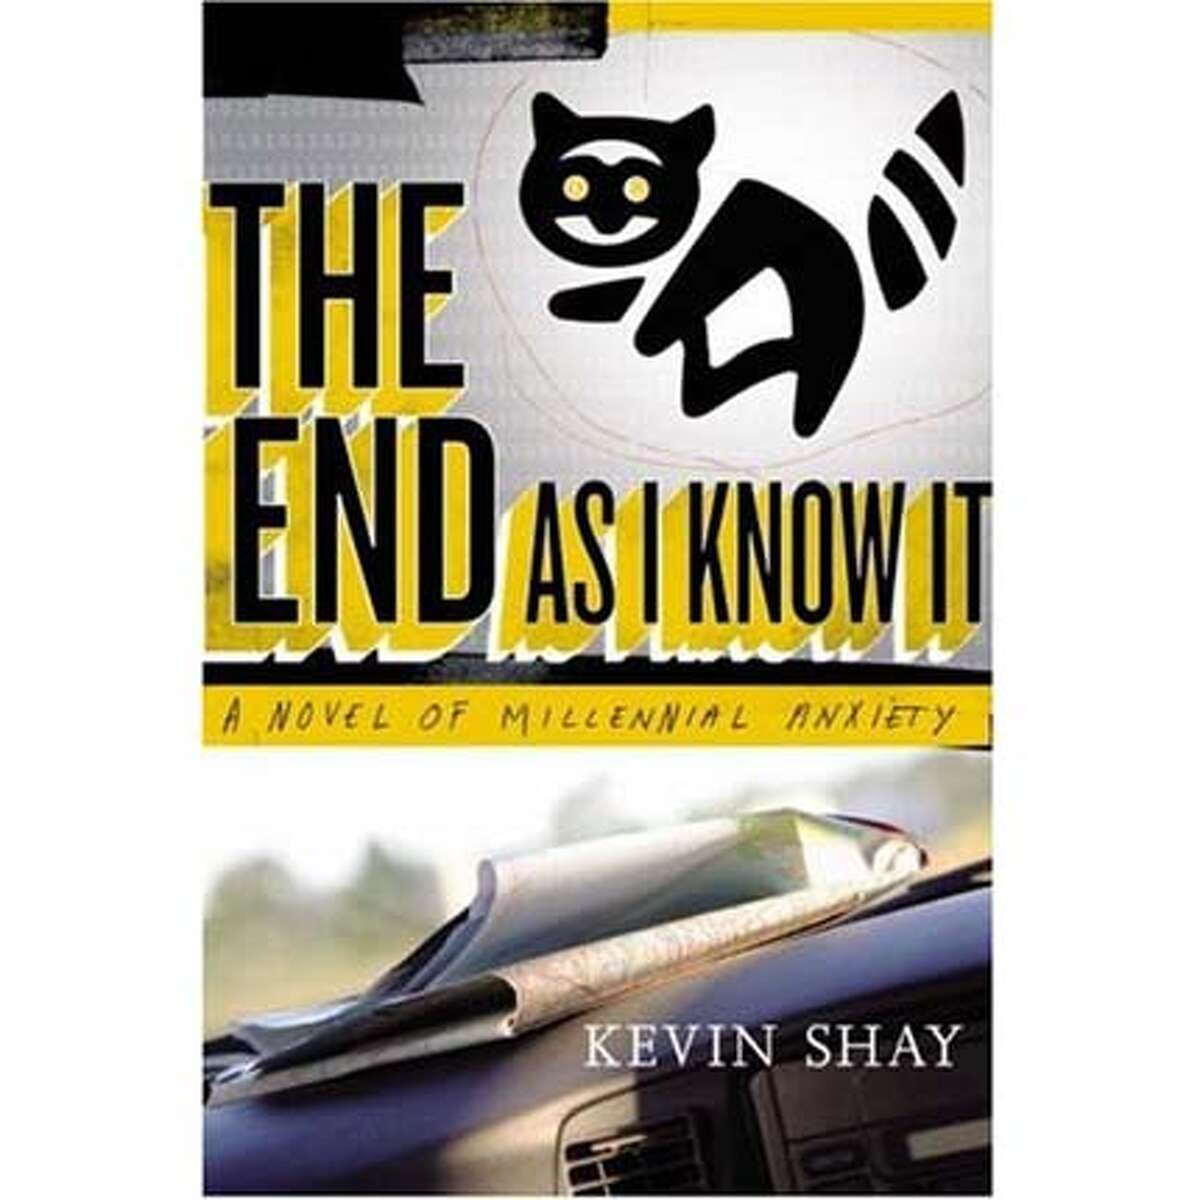 "The End As I Know It: A Novel of Millennial Anxiety" by Kevin Shay